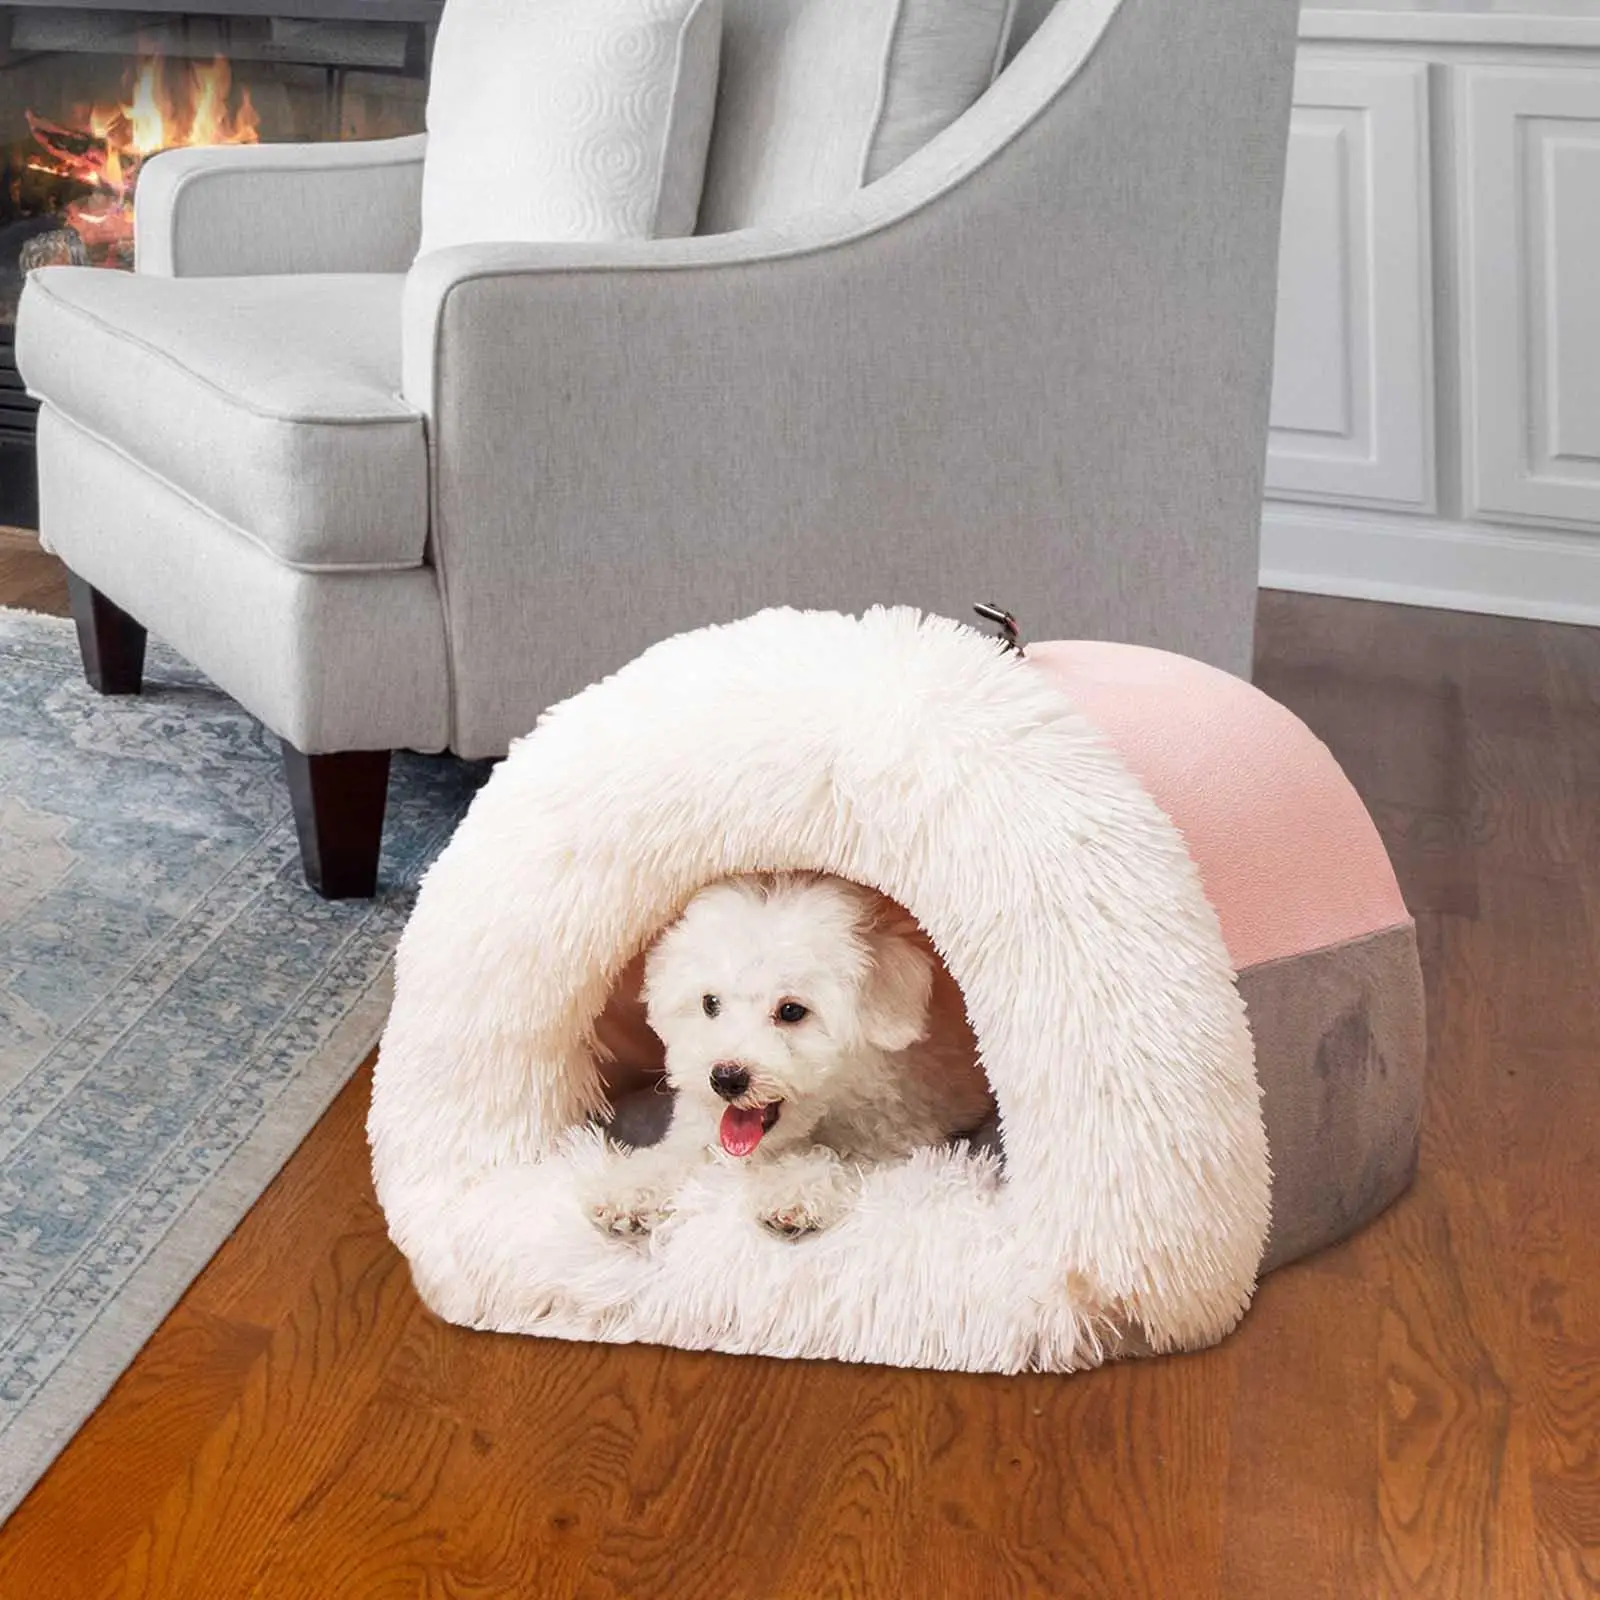 Semi Enclosed Pet Cat Nest Cat Bed Anti Slip Bottom Potable with Handle Calming Pet Supplies Cozy Kennel Hideout for Cats Dog